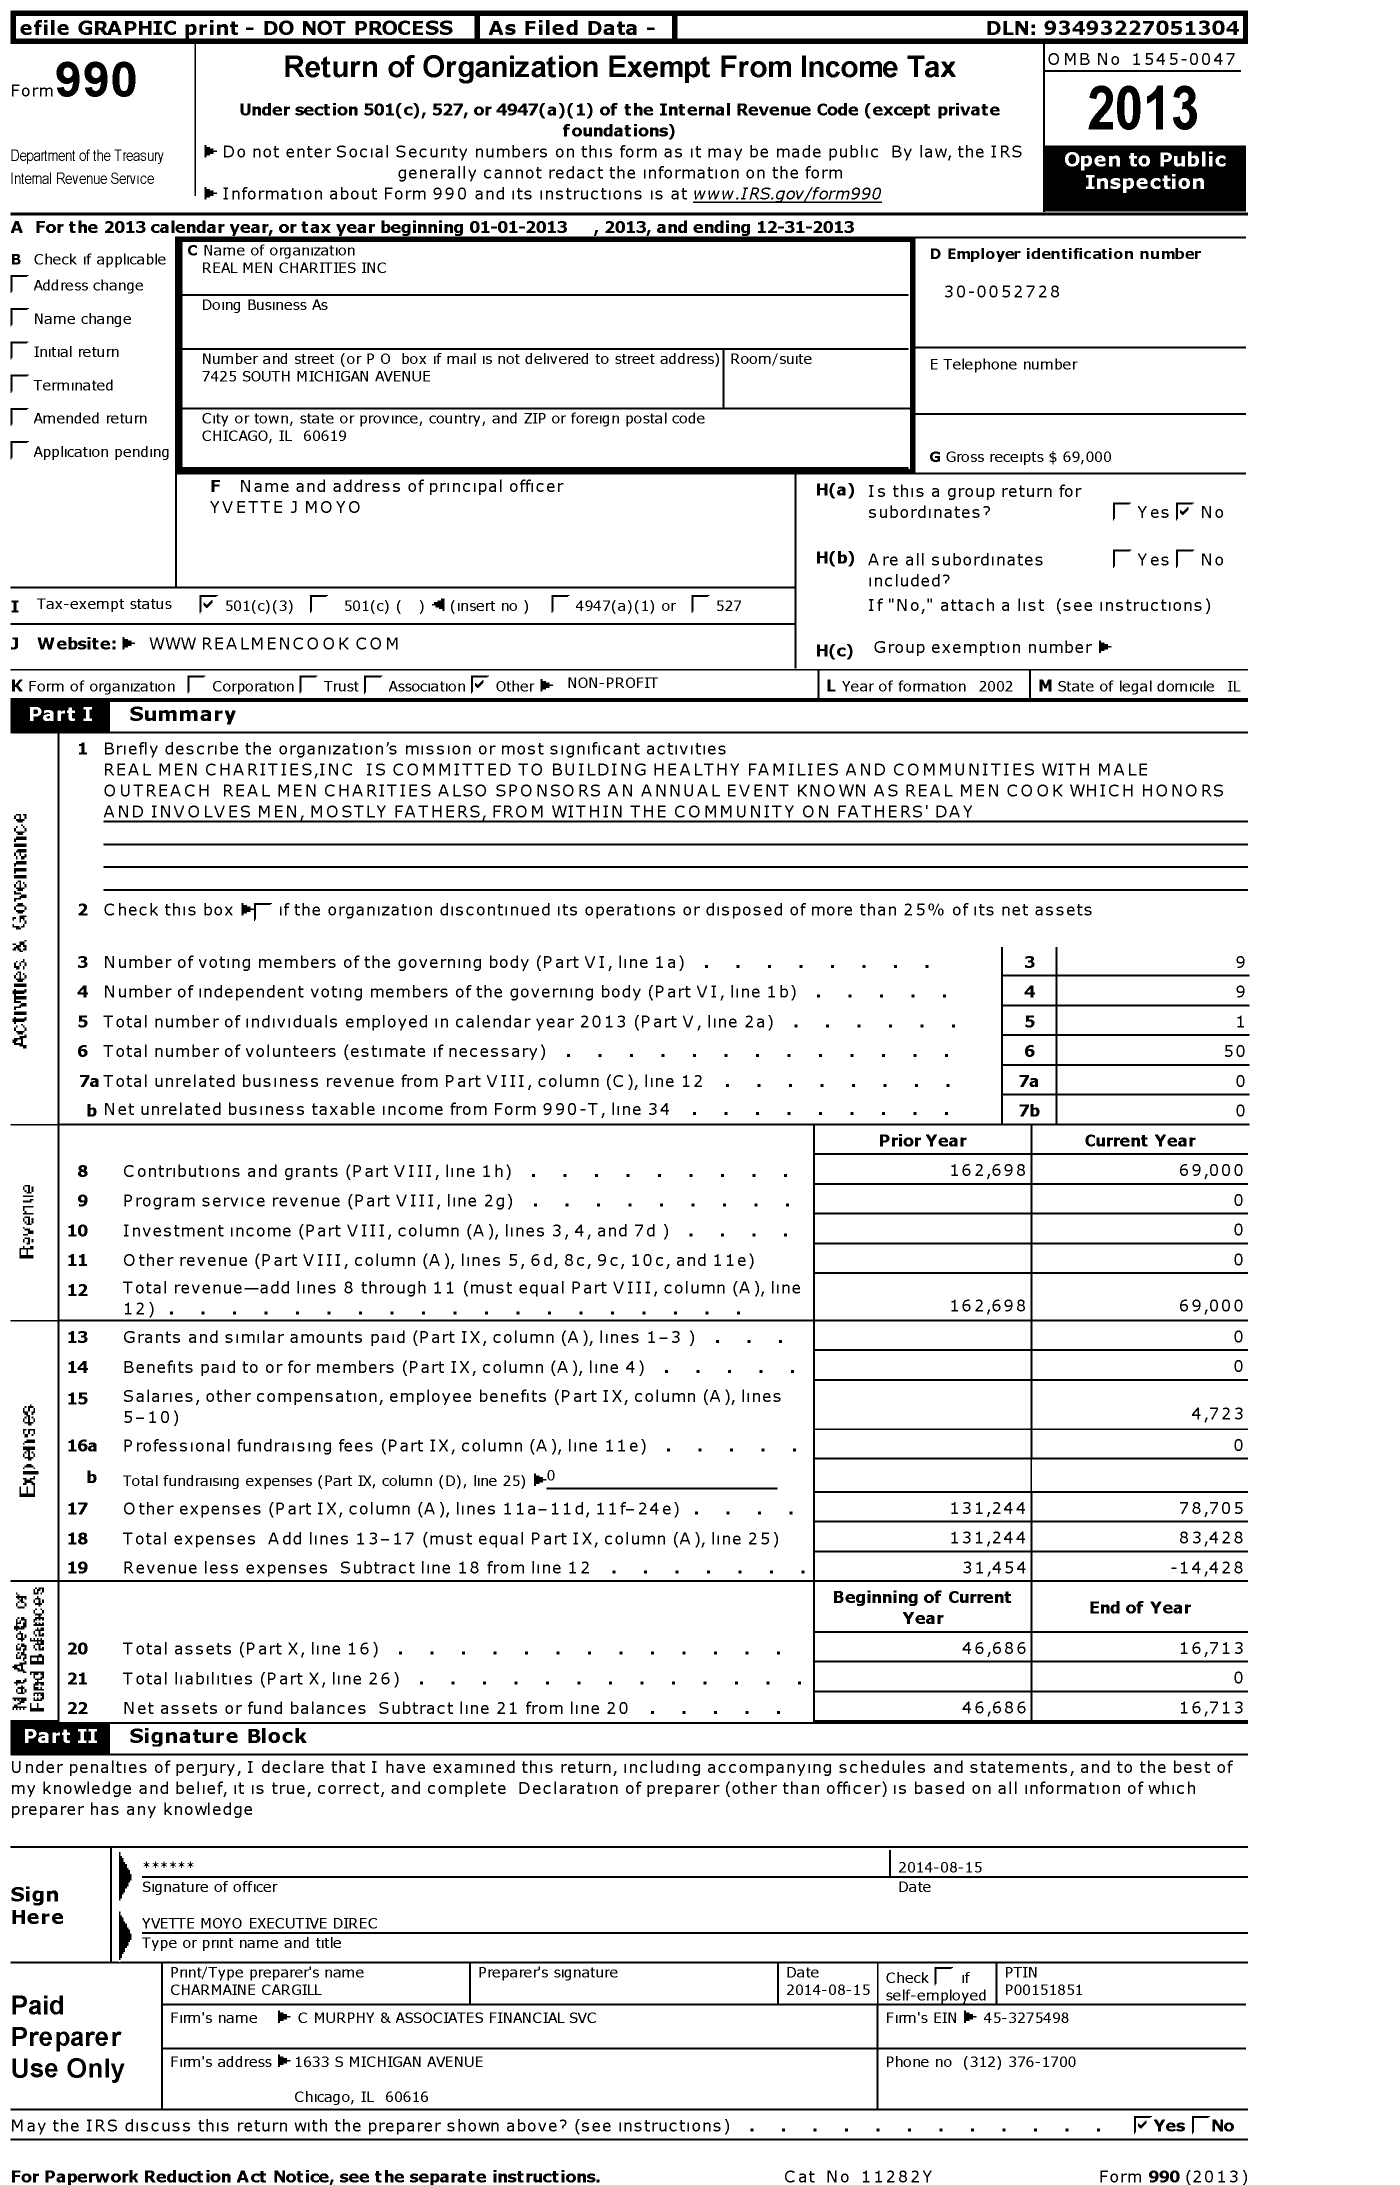 Image of first page of 2013 Form 990 for Real Men Charities